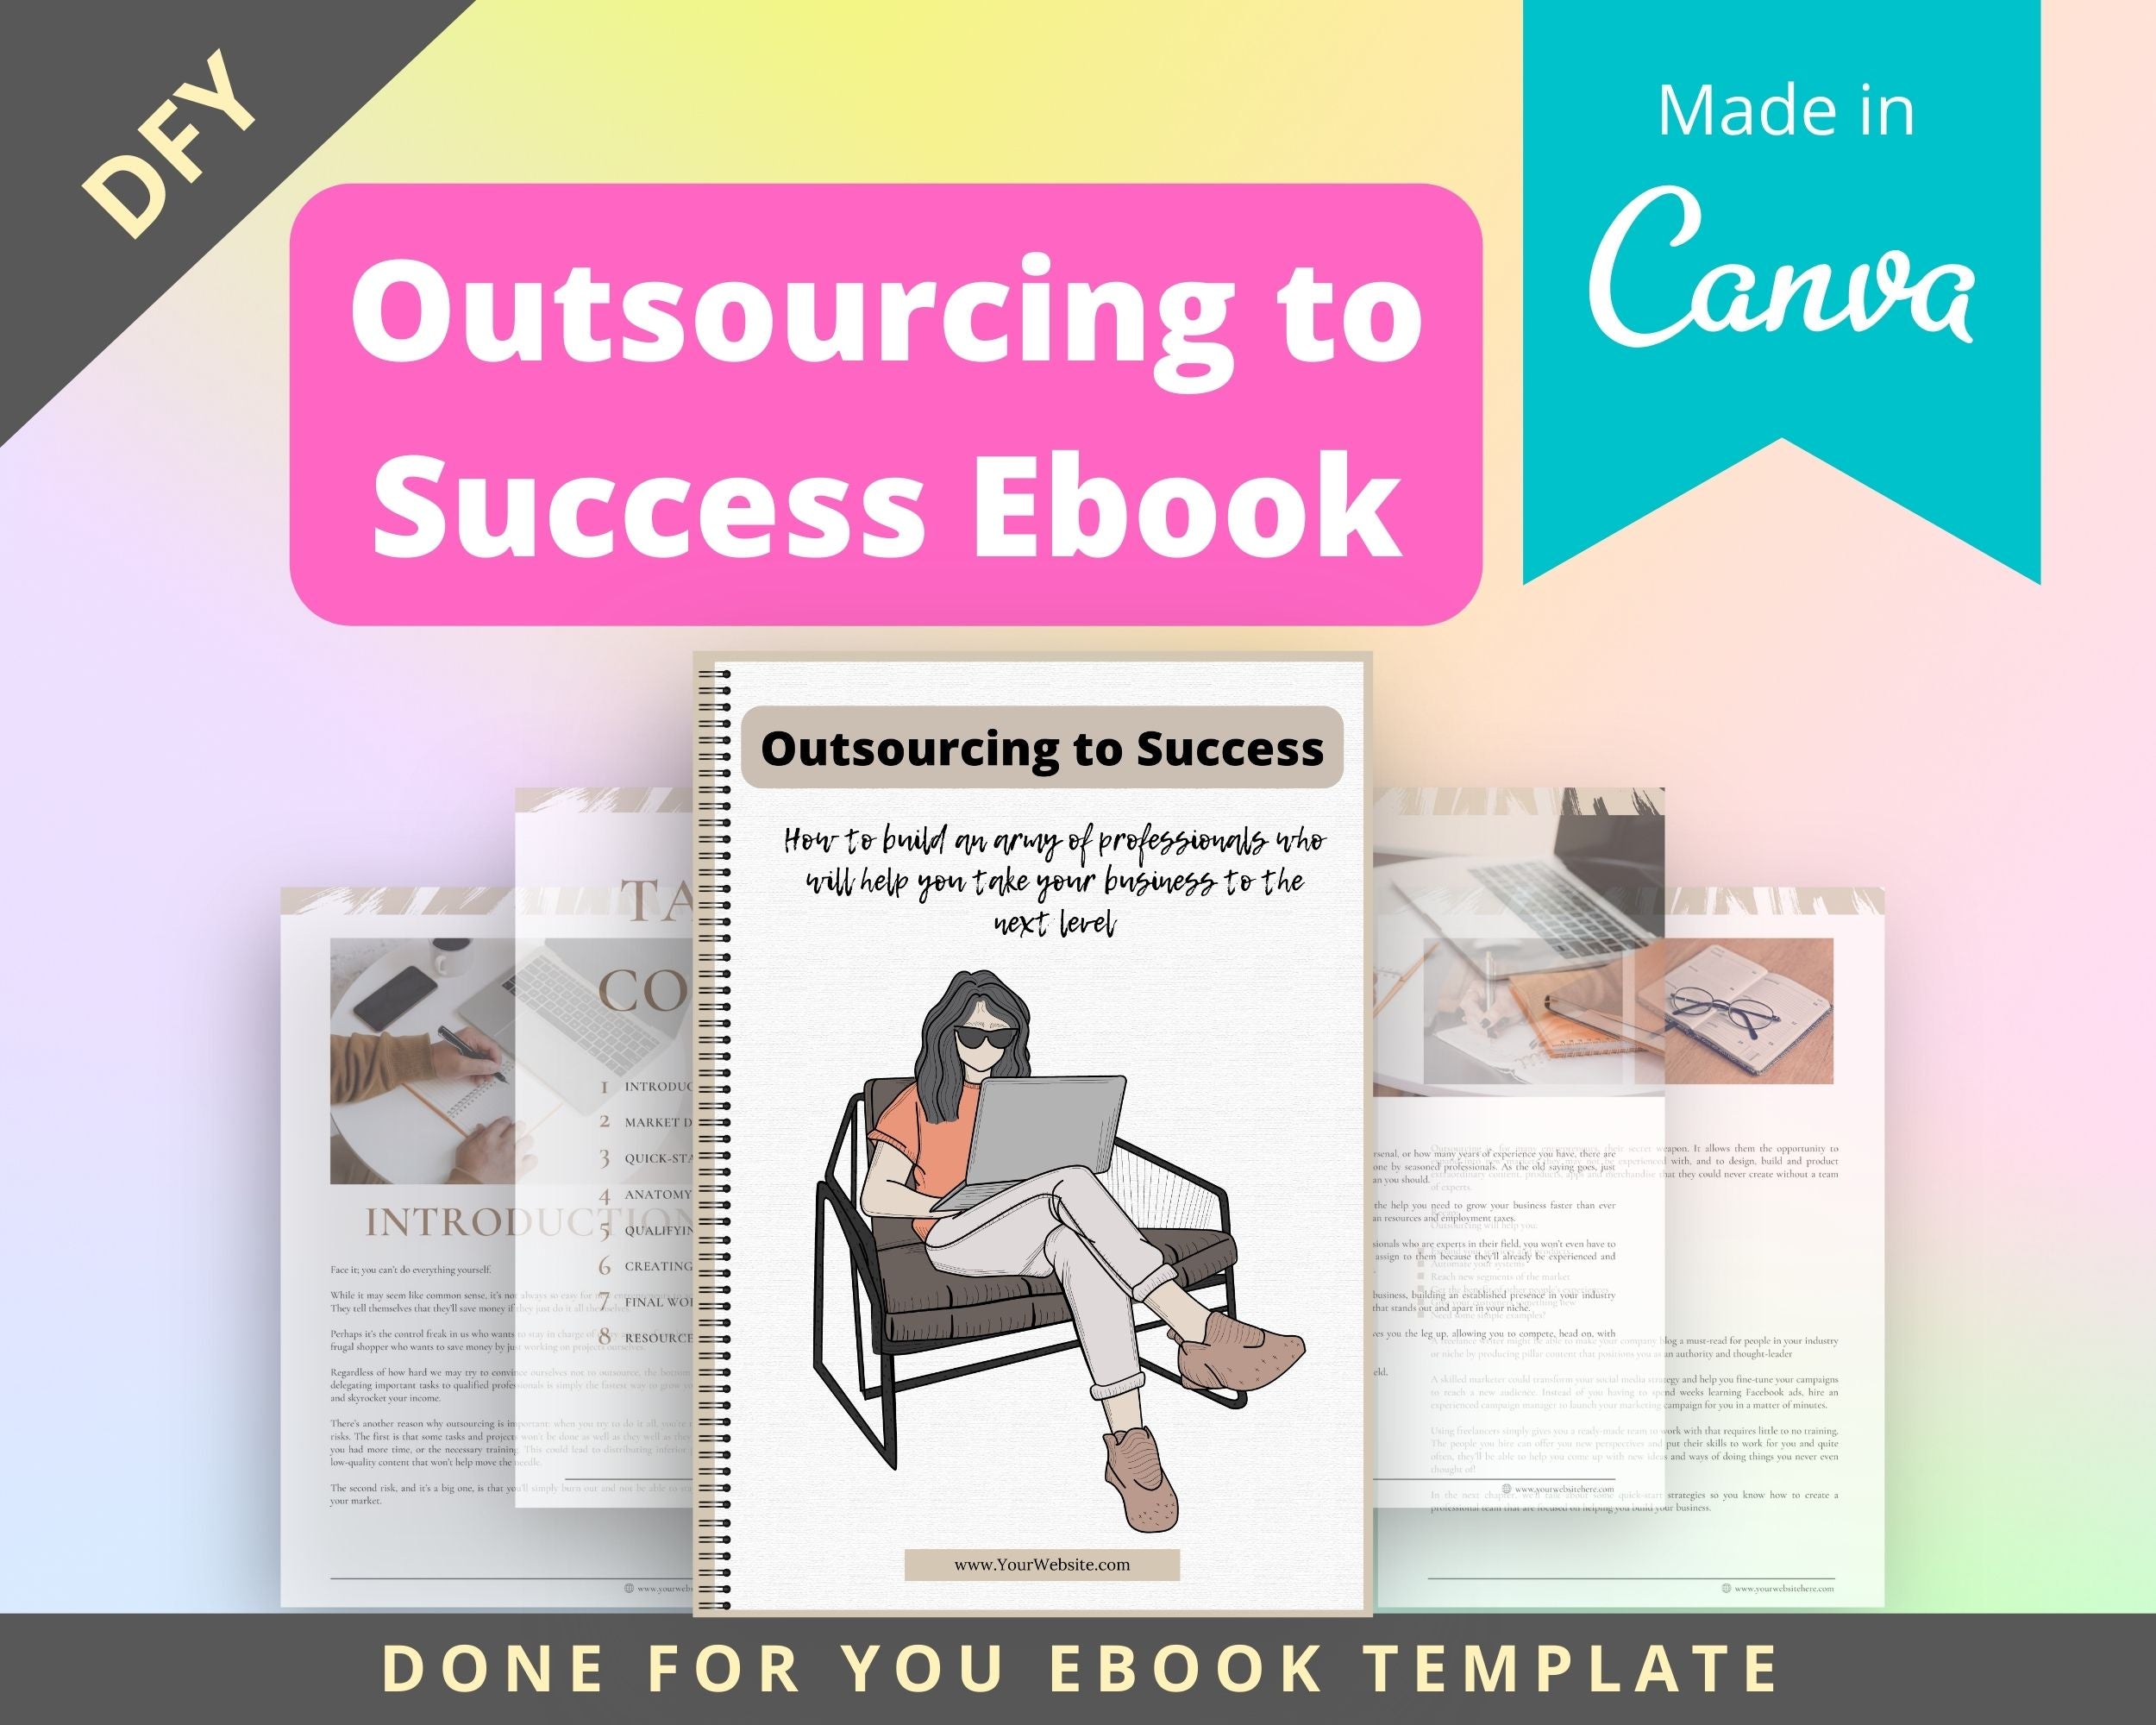 Editable Outsourcing To Success Ebook | Done-for-You Ebook in Canva | Rebrandable and Resizable Canva Template